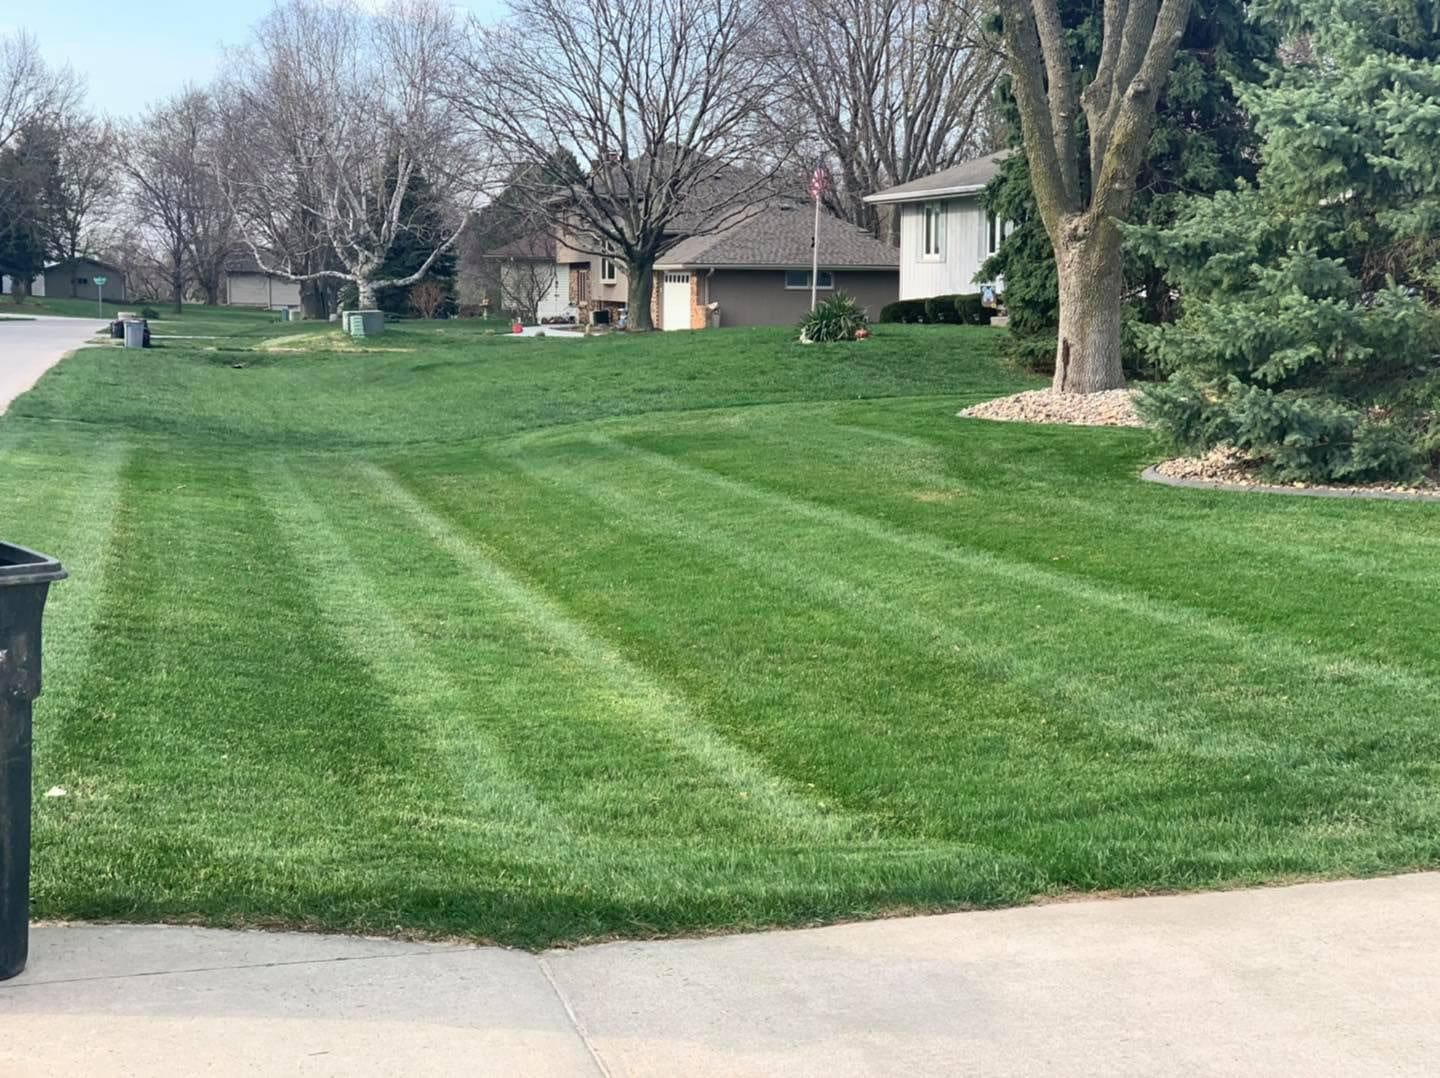 A lawn that has been cut in the grass.